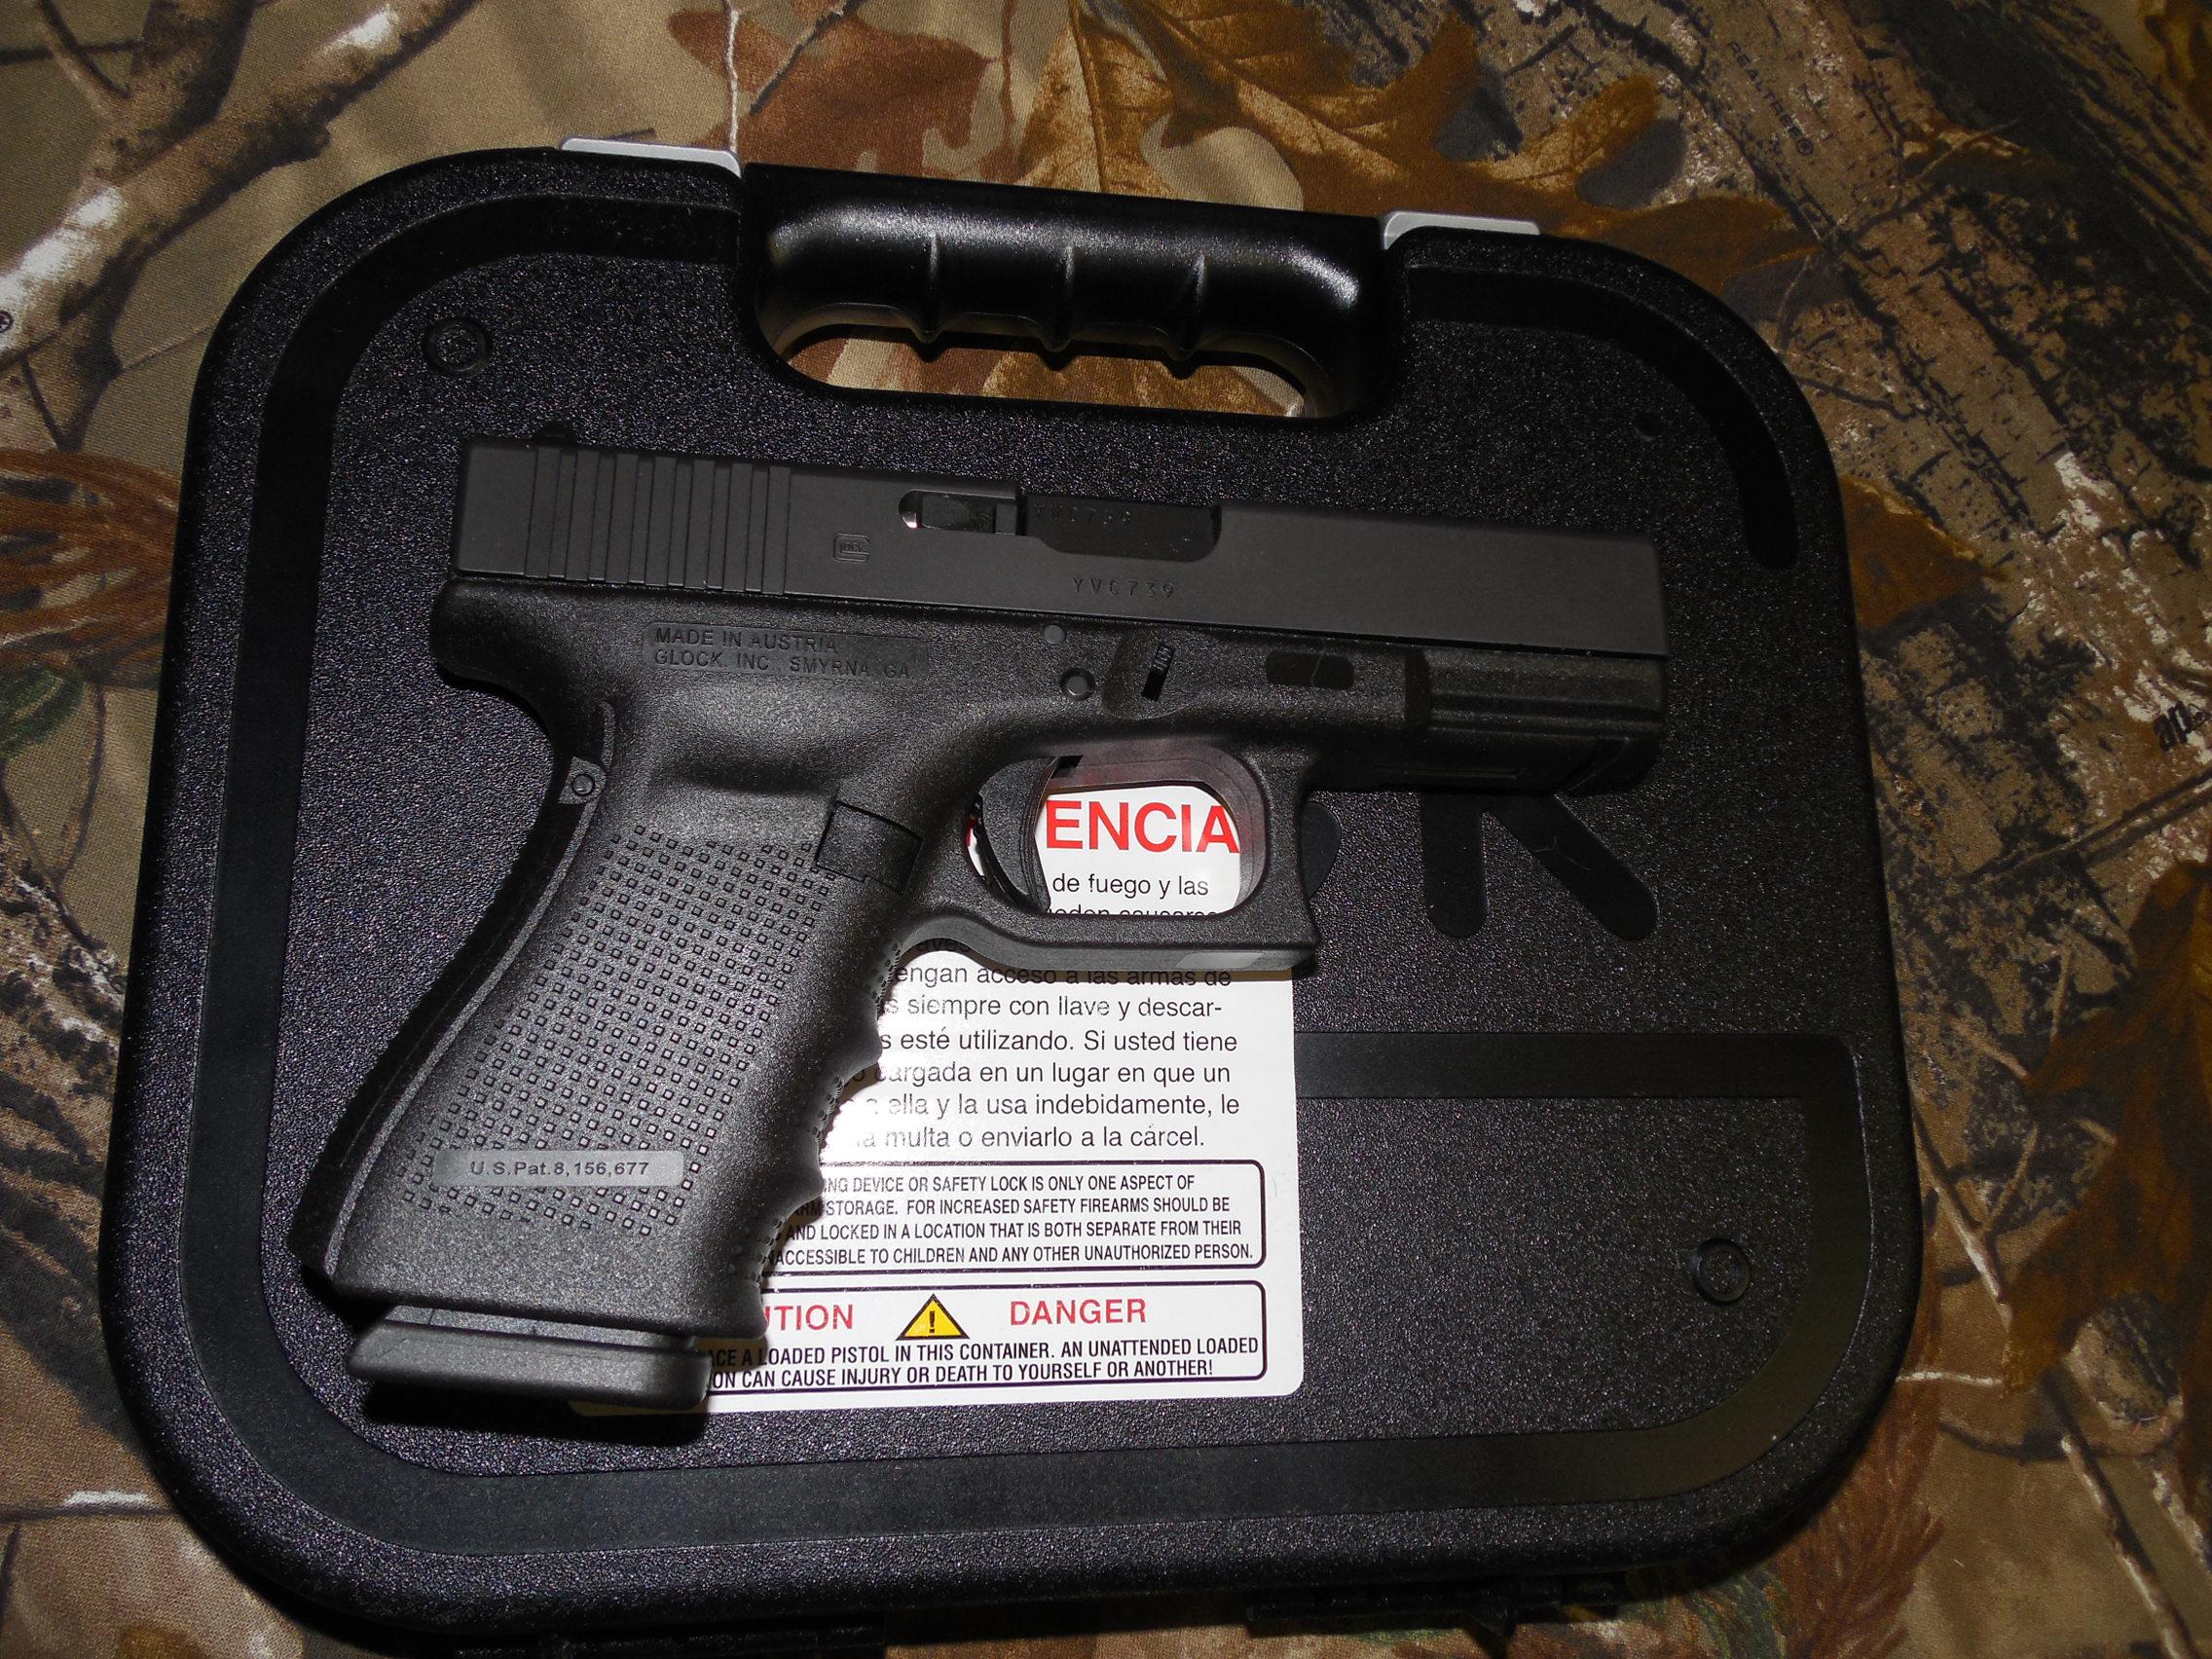 GLOCK-G-23-GEN-4-40-S-and-W-3-13-ROUND-MAGSZINES-FACTORY-NEW-IN-BOX-and-RECEIVE-ONE-FREE-31-ROUND-MA_100663732_21155_3CB3AFFC11B4A938.jpg